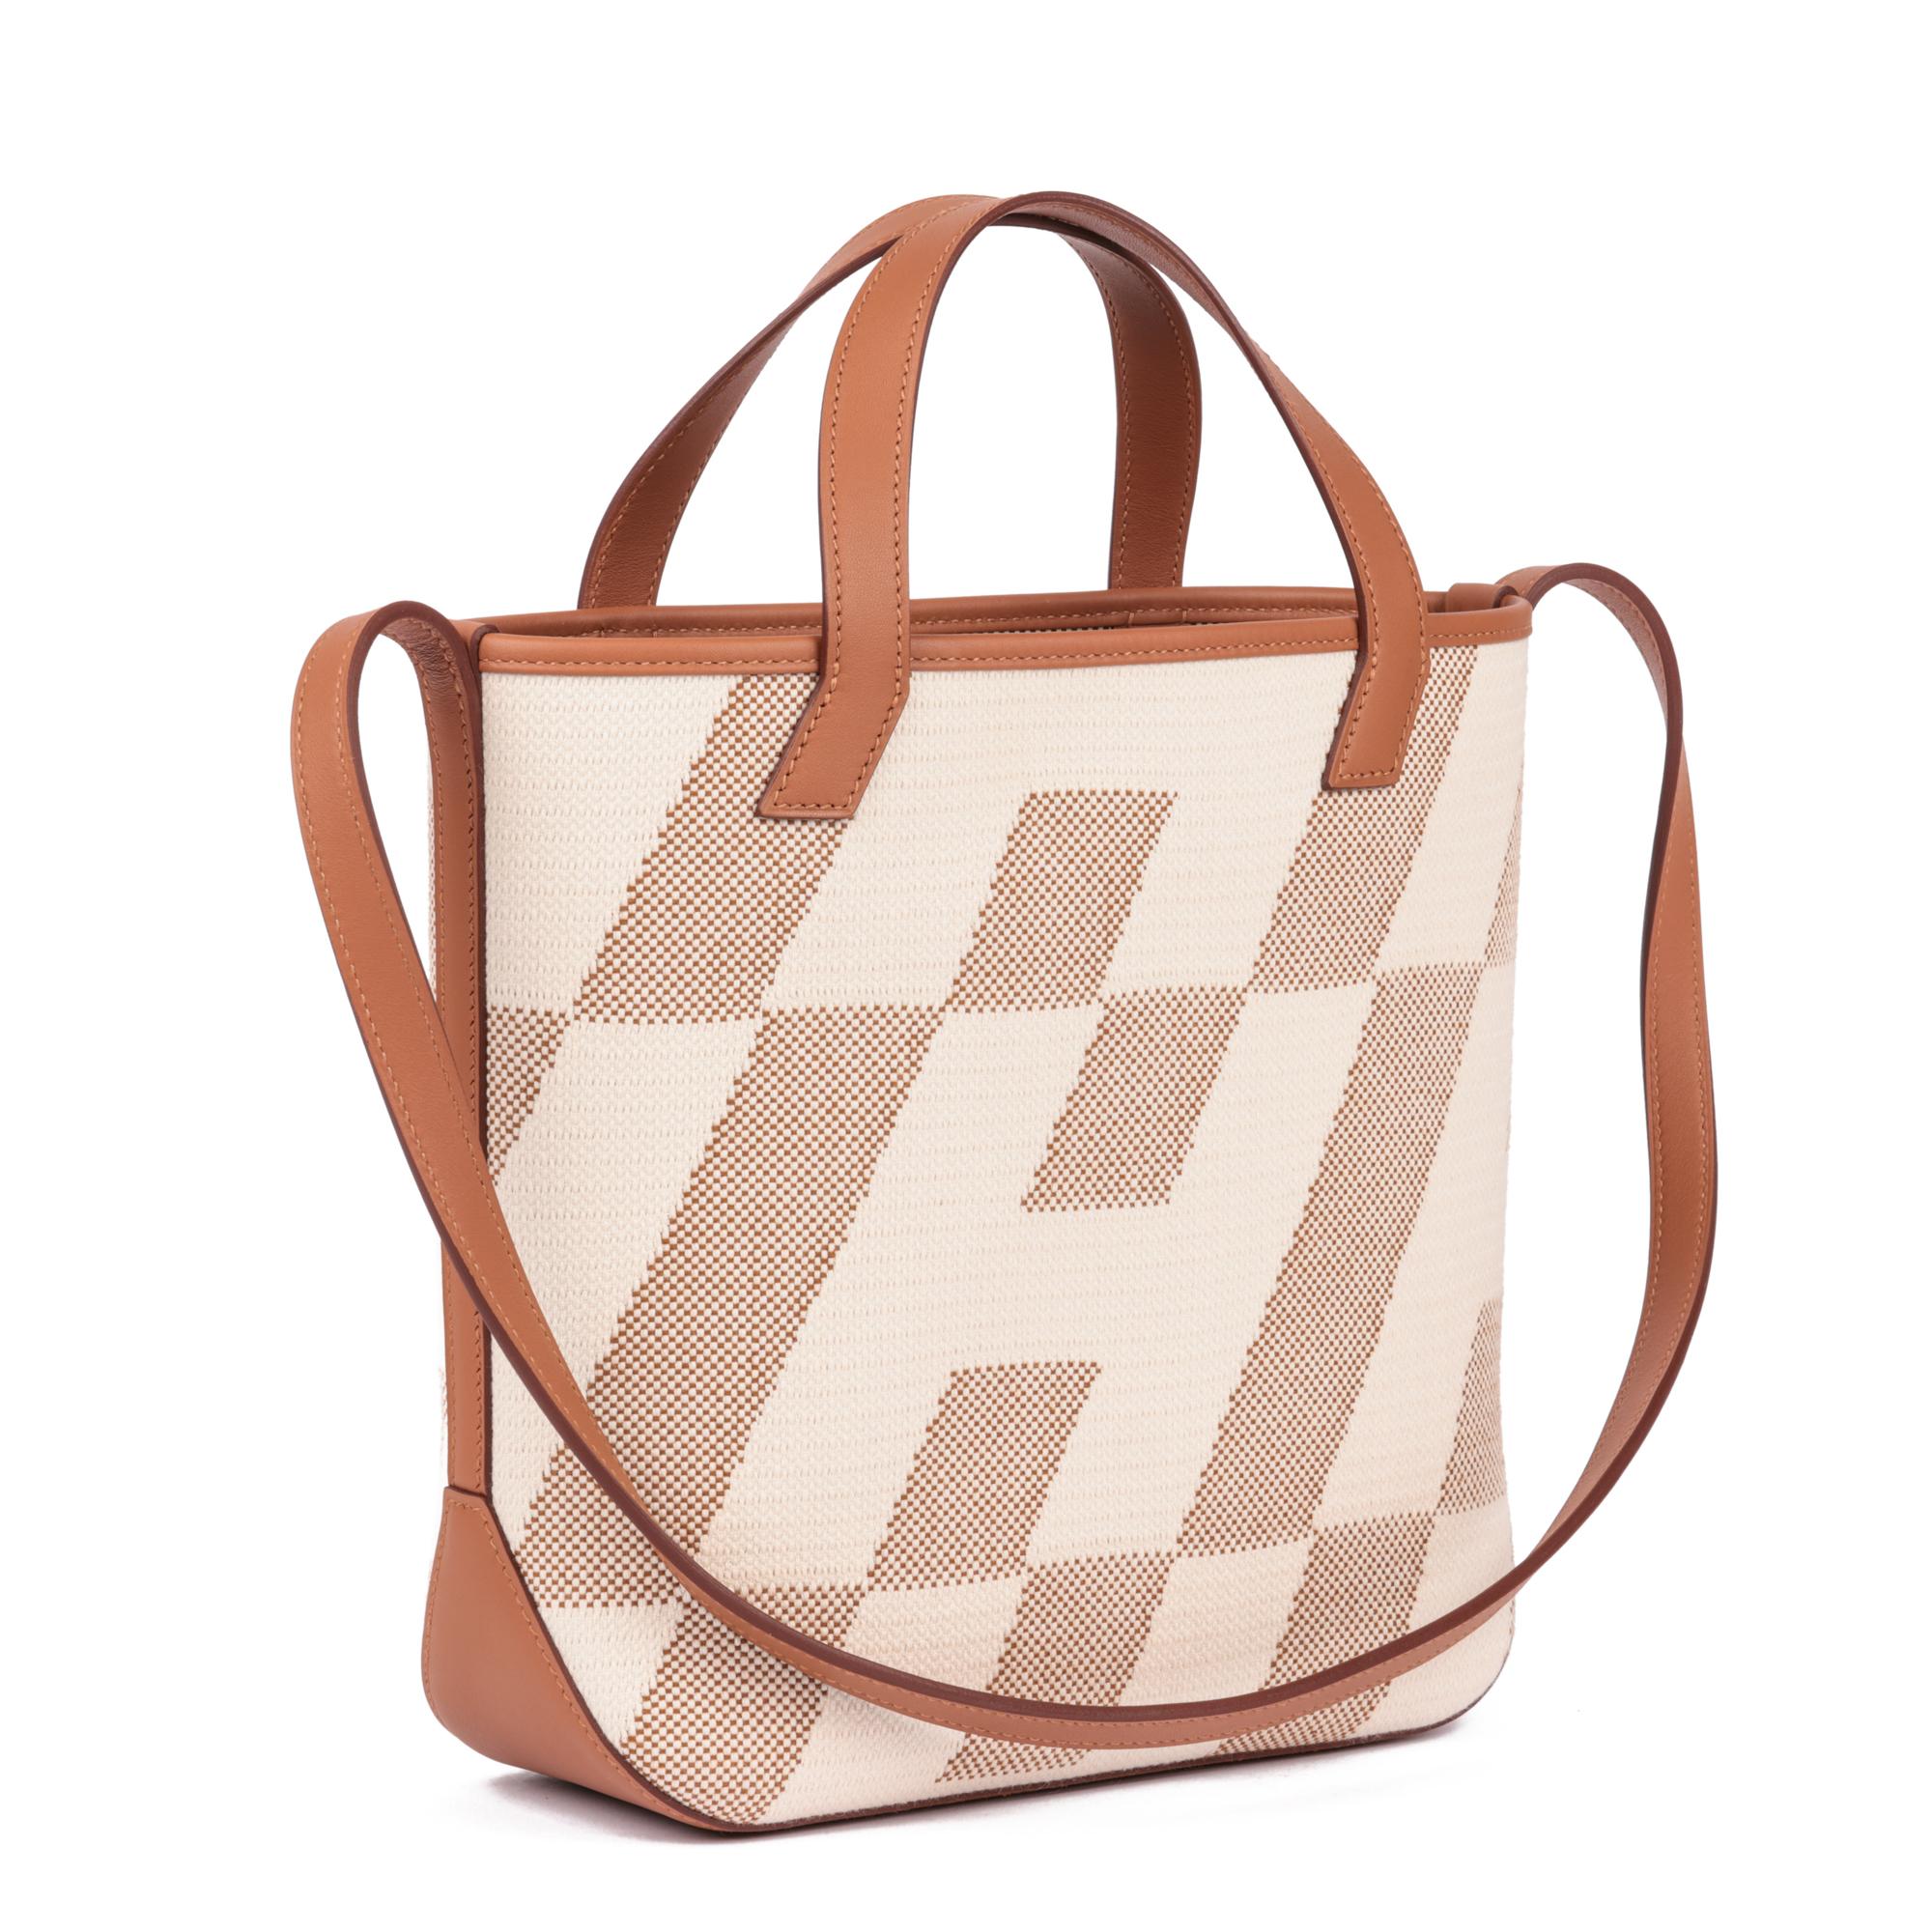 HERMÈS
Beige Canvas & Gold Swift Leather Cabas H en Biais 27 bag

Xupes Reference: CB834
Serial Number: U
Age (Circa): 2022
Accompanied By: Hermès Dust Bag, Box, Ribbon
Authenticity Details: Date Stamp (Made in France)
Gender: Ladies
Type: Tote,